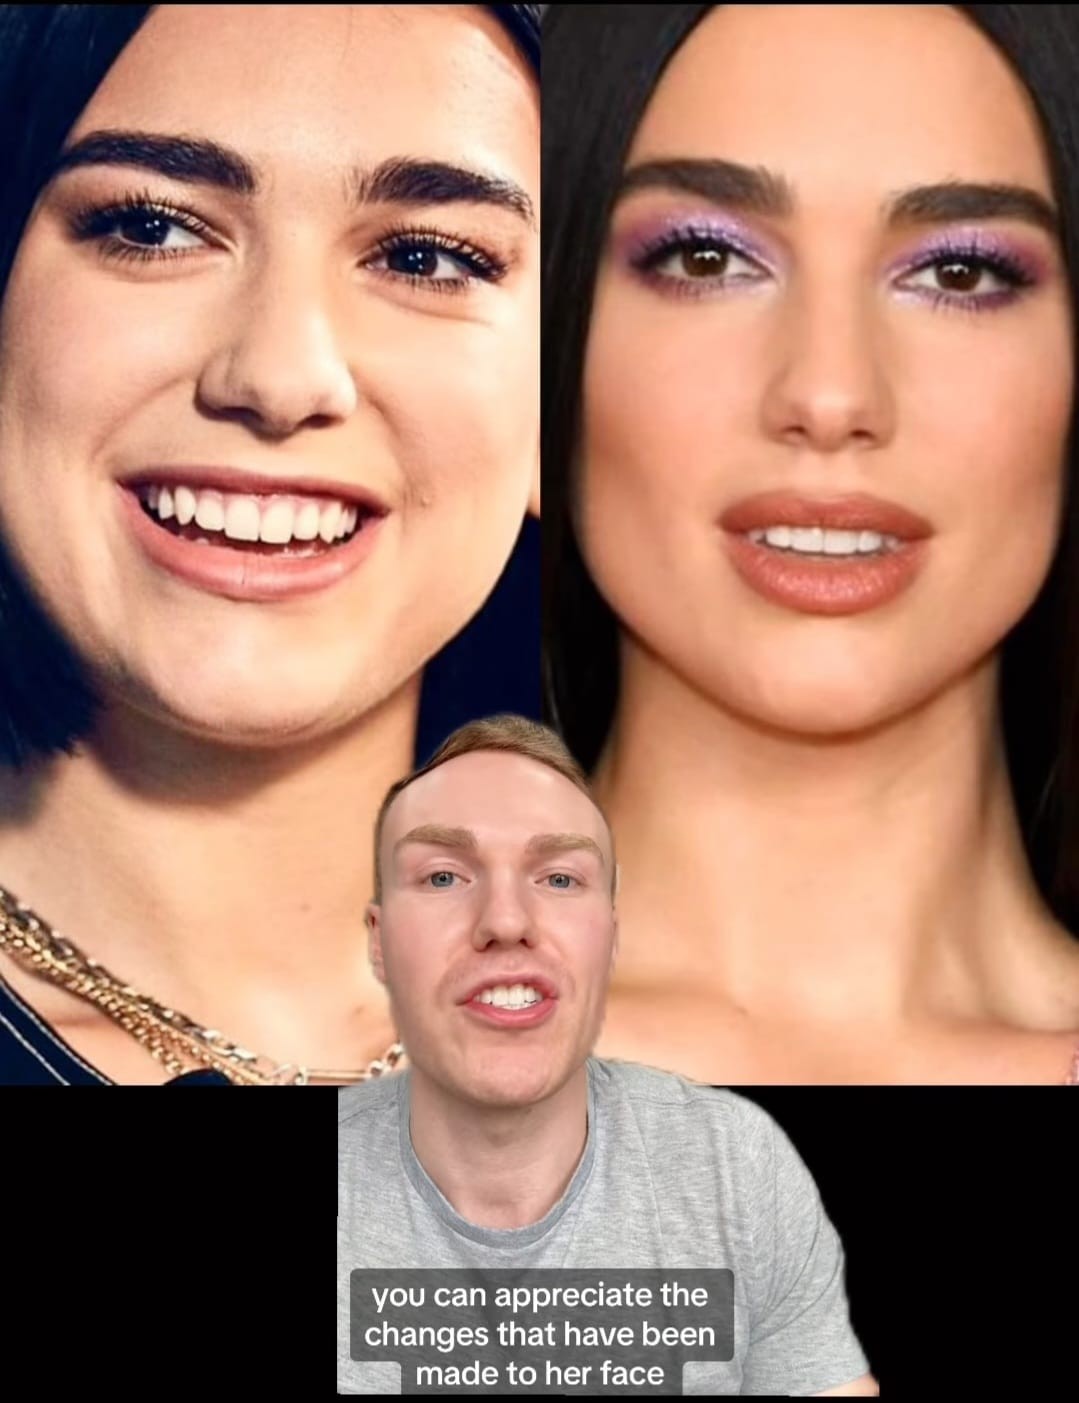 Before and after images of Dua Lipa